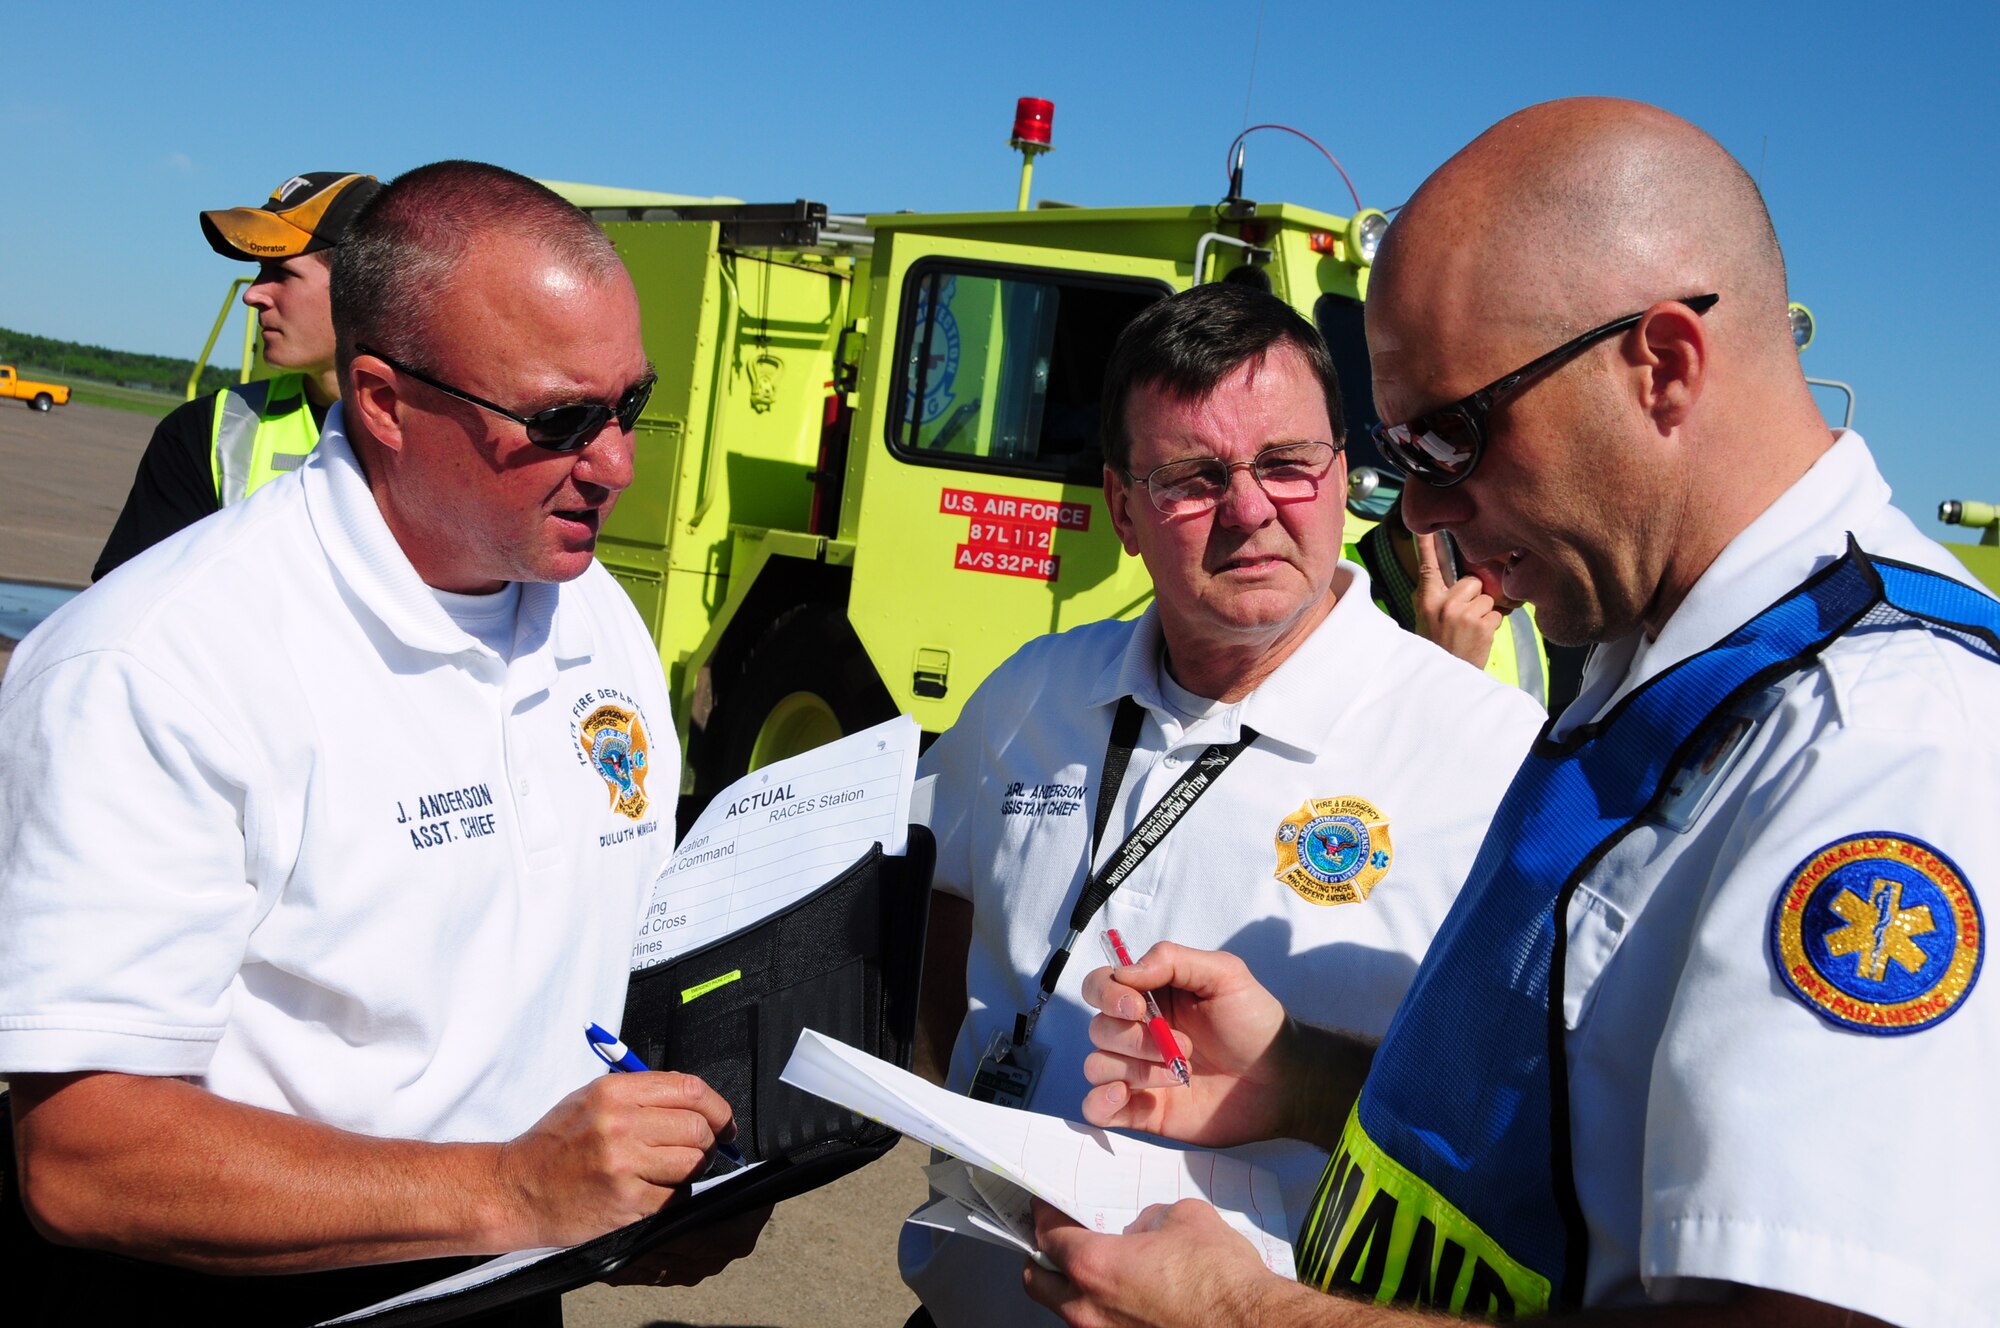 U.S. Air National Guard Fire Fighter Joel Anderson (left) and Carl Anderson, both 148th Fighter Wing Assistant Fire Chiefs, communicate with aGold Cross EMT during a Major Accident Response Exercise (MARE) of a commercial airliner crash at the  Duluth International Airport, Minn., June 3, 2010. The MARE was held in conjunction with local, state and federal emergency response agencies to test and validate emergency response capabilities. (U.S. Air Force photo by Master Sgt. Jason W. Rolfe/Released)